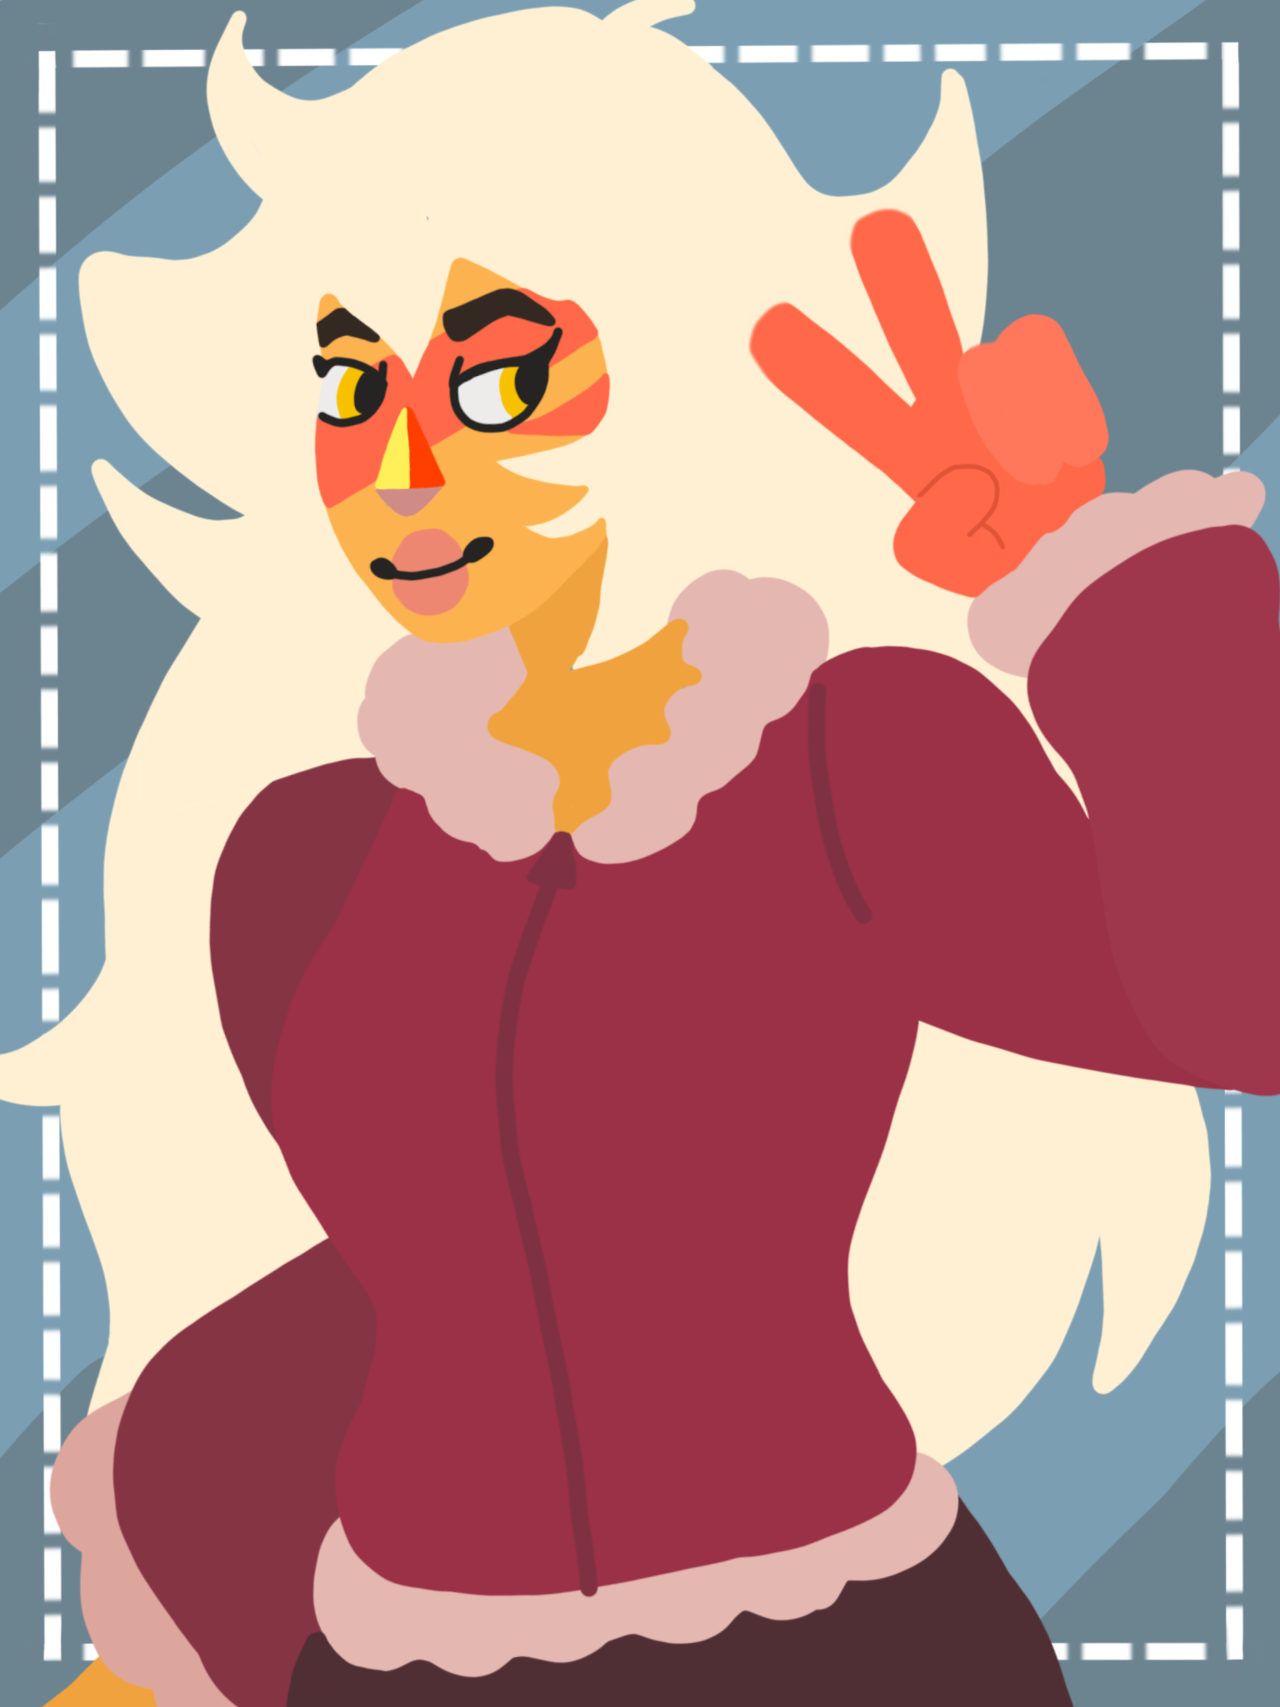 Jasper in a big winter coat request from theselfesteemunit. Requests are always open:)